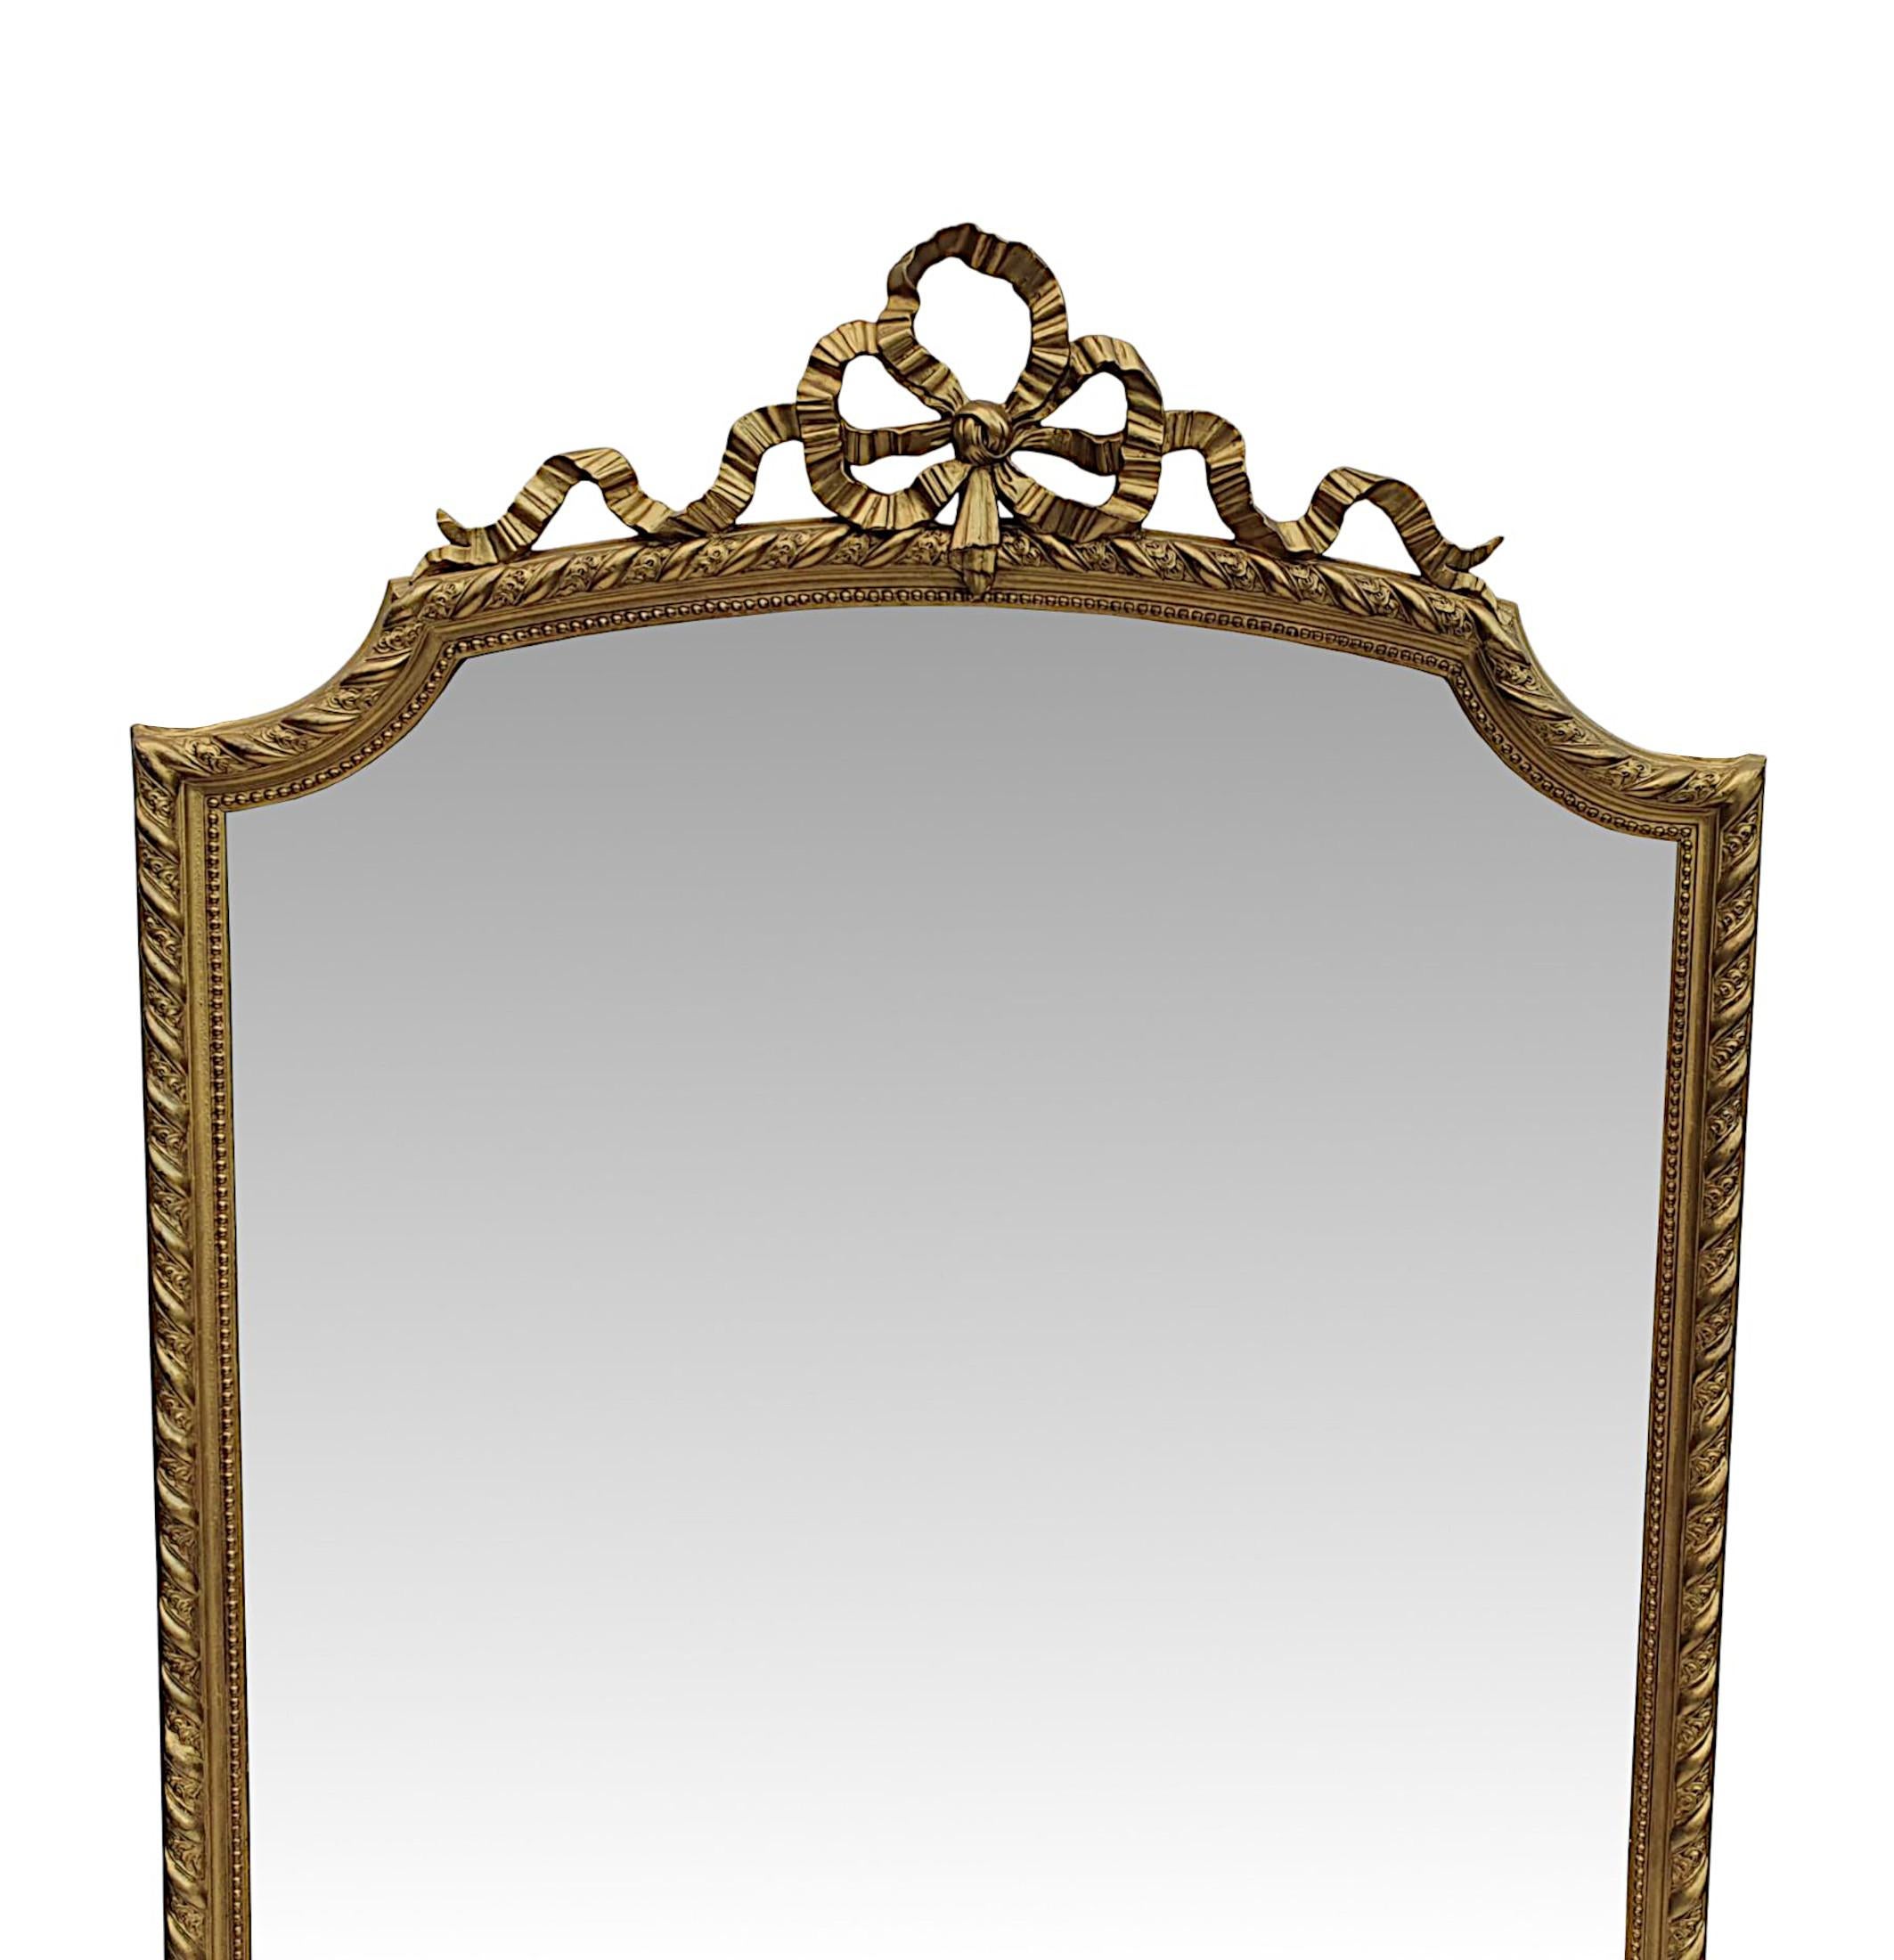 A very fine 19th Century giltwood leaner, hall or overmantle mirror of tall and narrow proportions. The slightly distressed, original bevelled mirror glass plate is set within a beautifully hand carved, moulded frame with foliate, ribbon and beaded